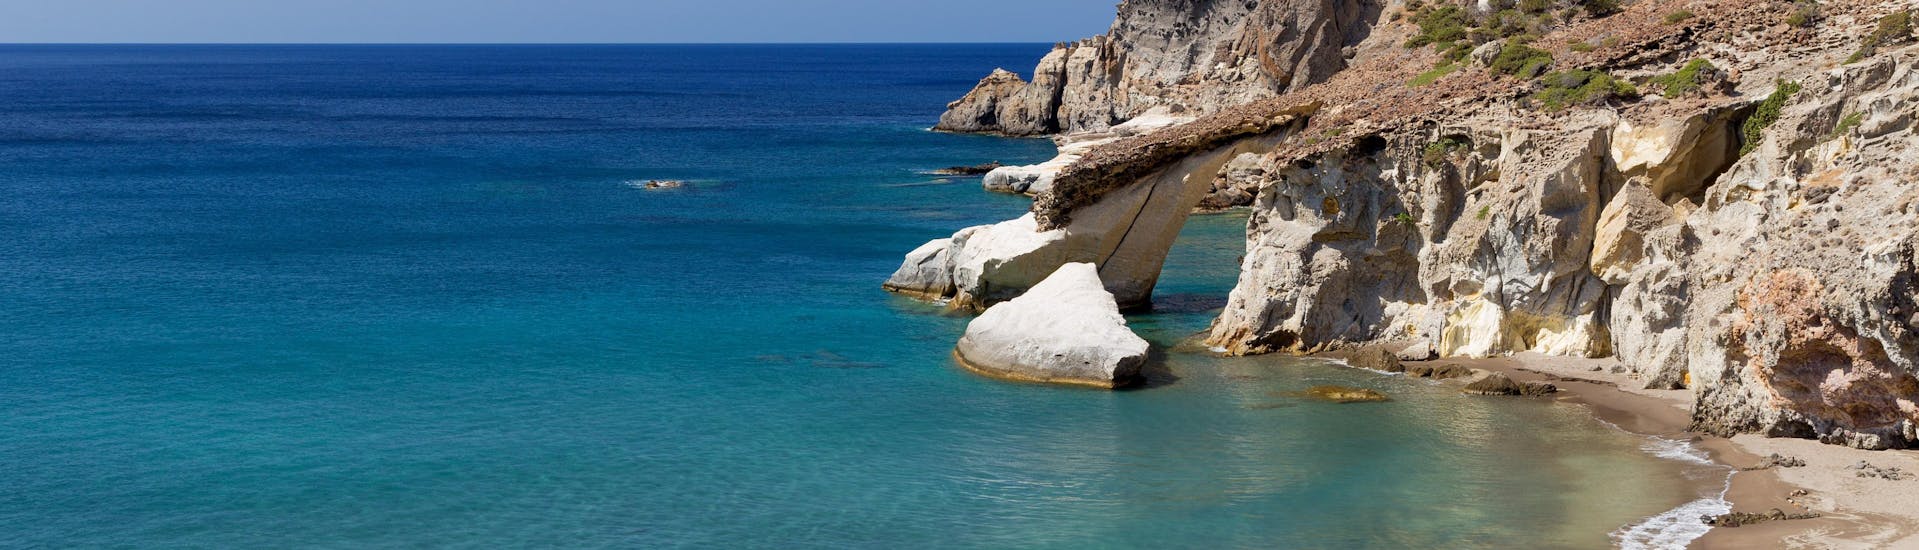 View of the beautiful beach of Gerontas, that you can discover during a boat trips around Milos Island.